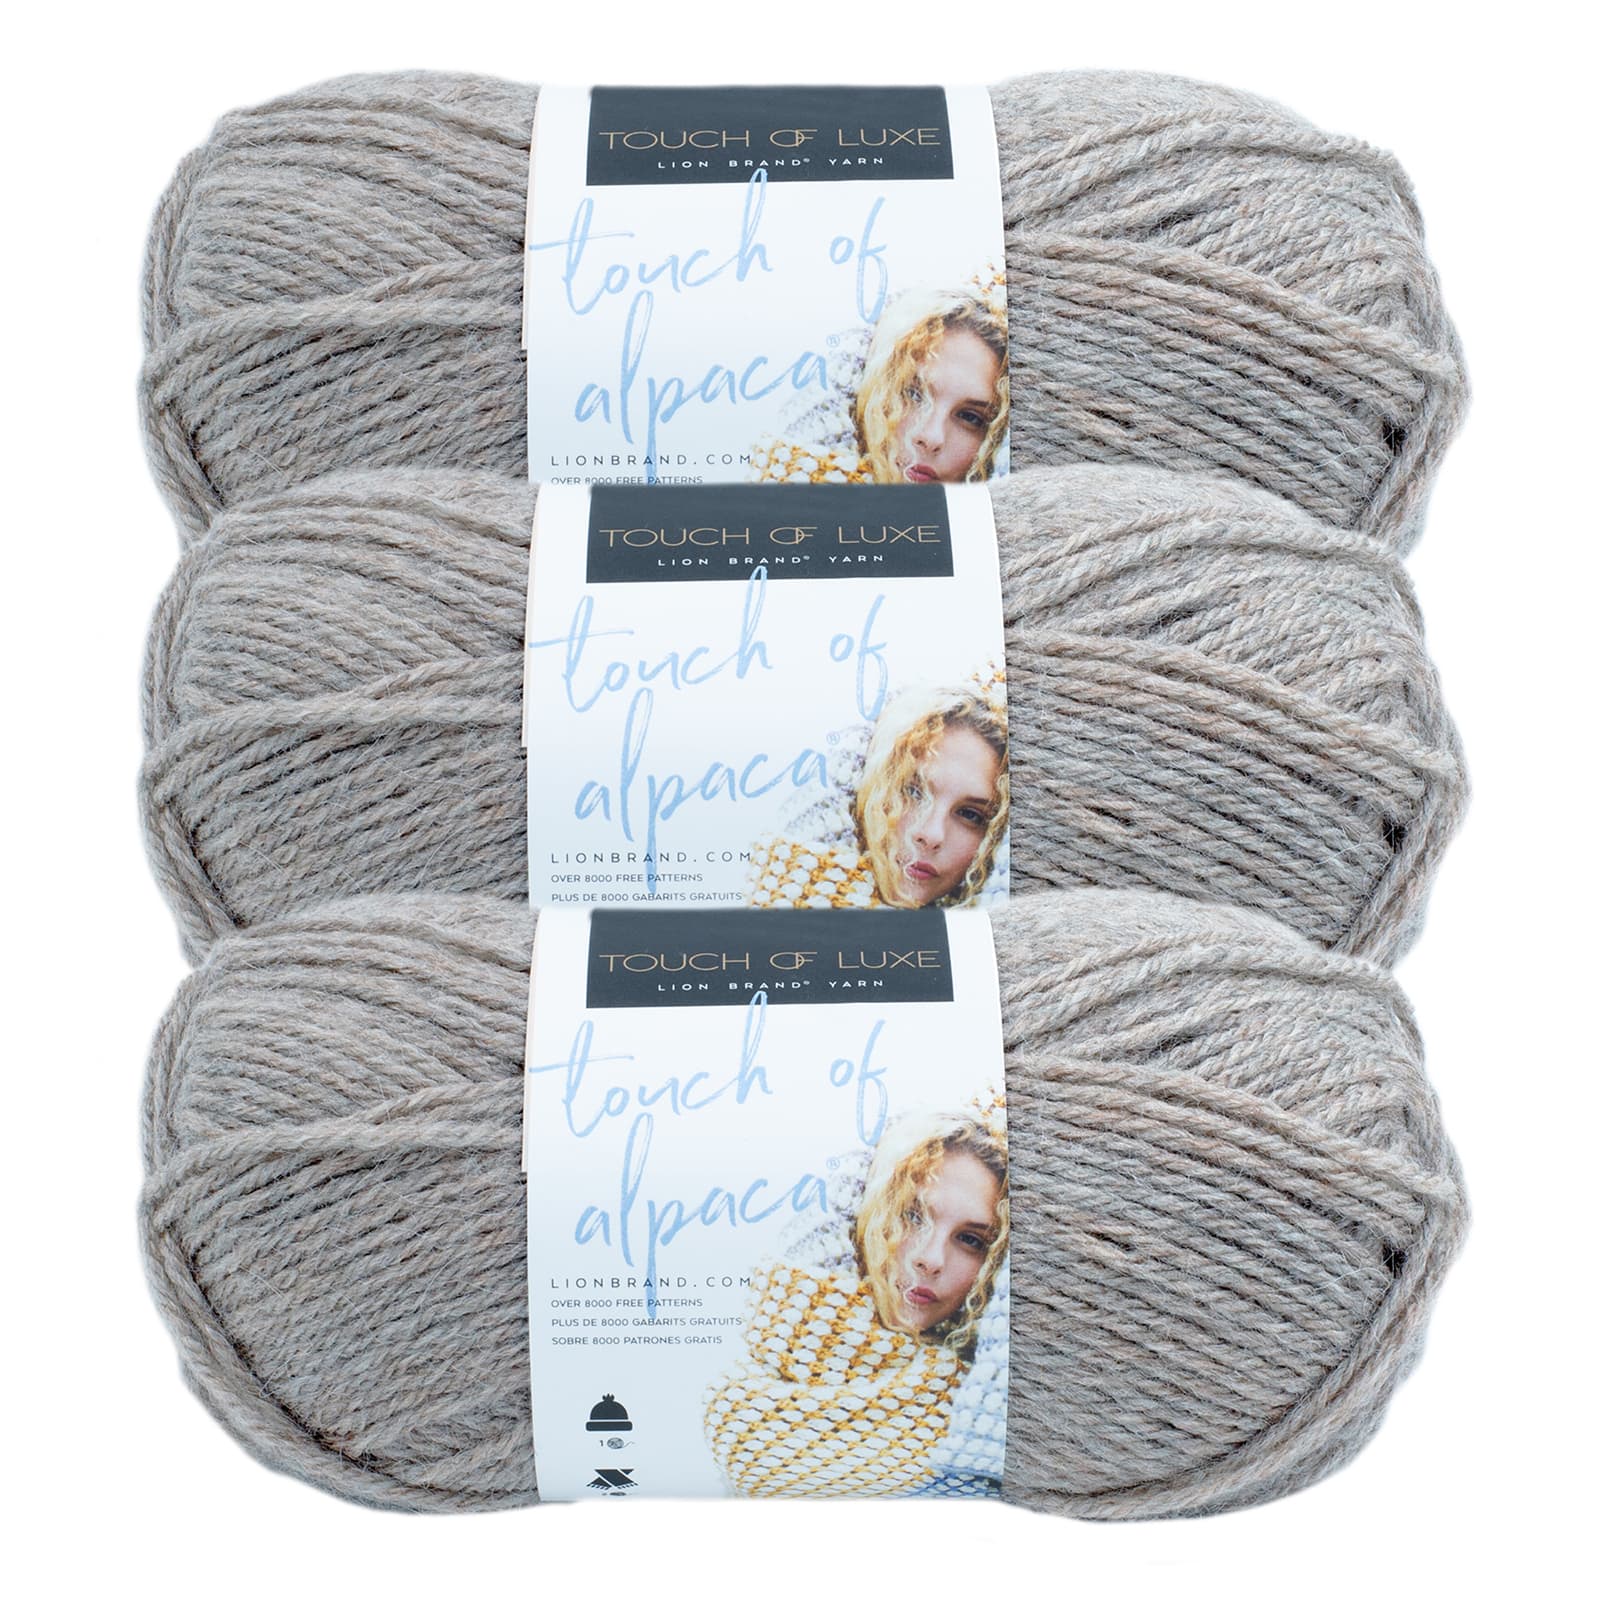  Lion Brand Yarn: Touch of Luxe